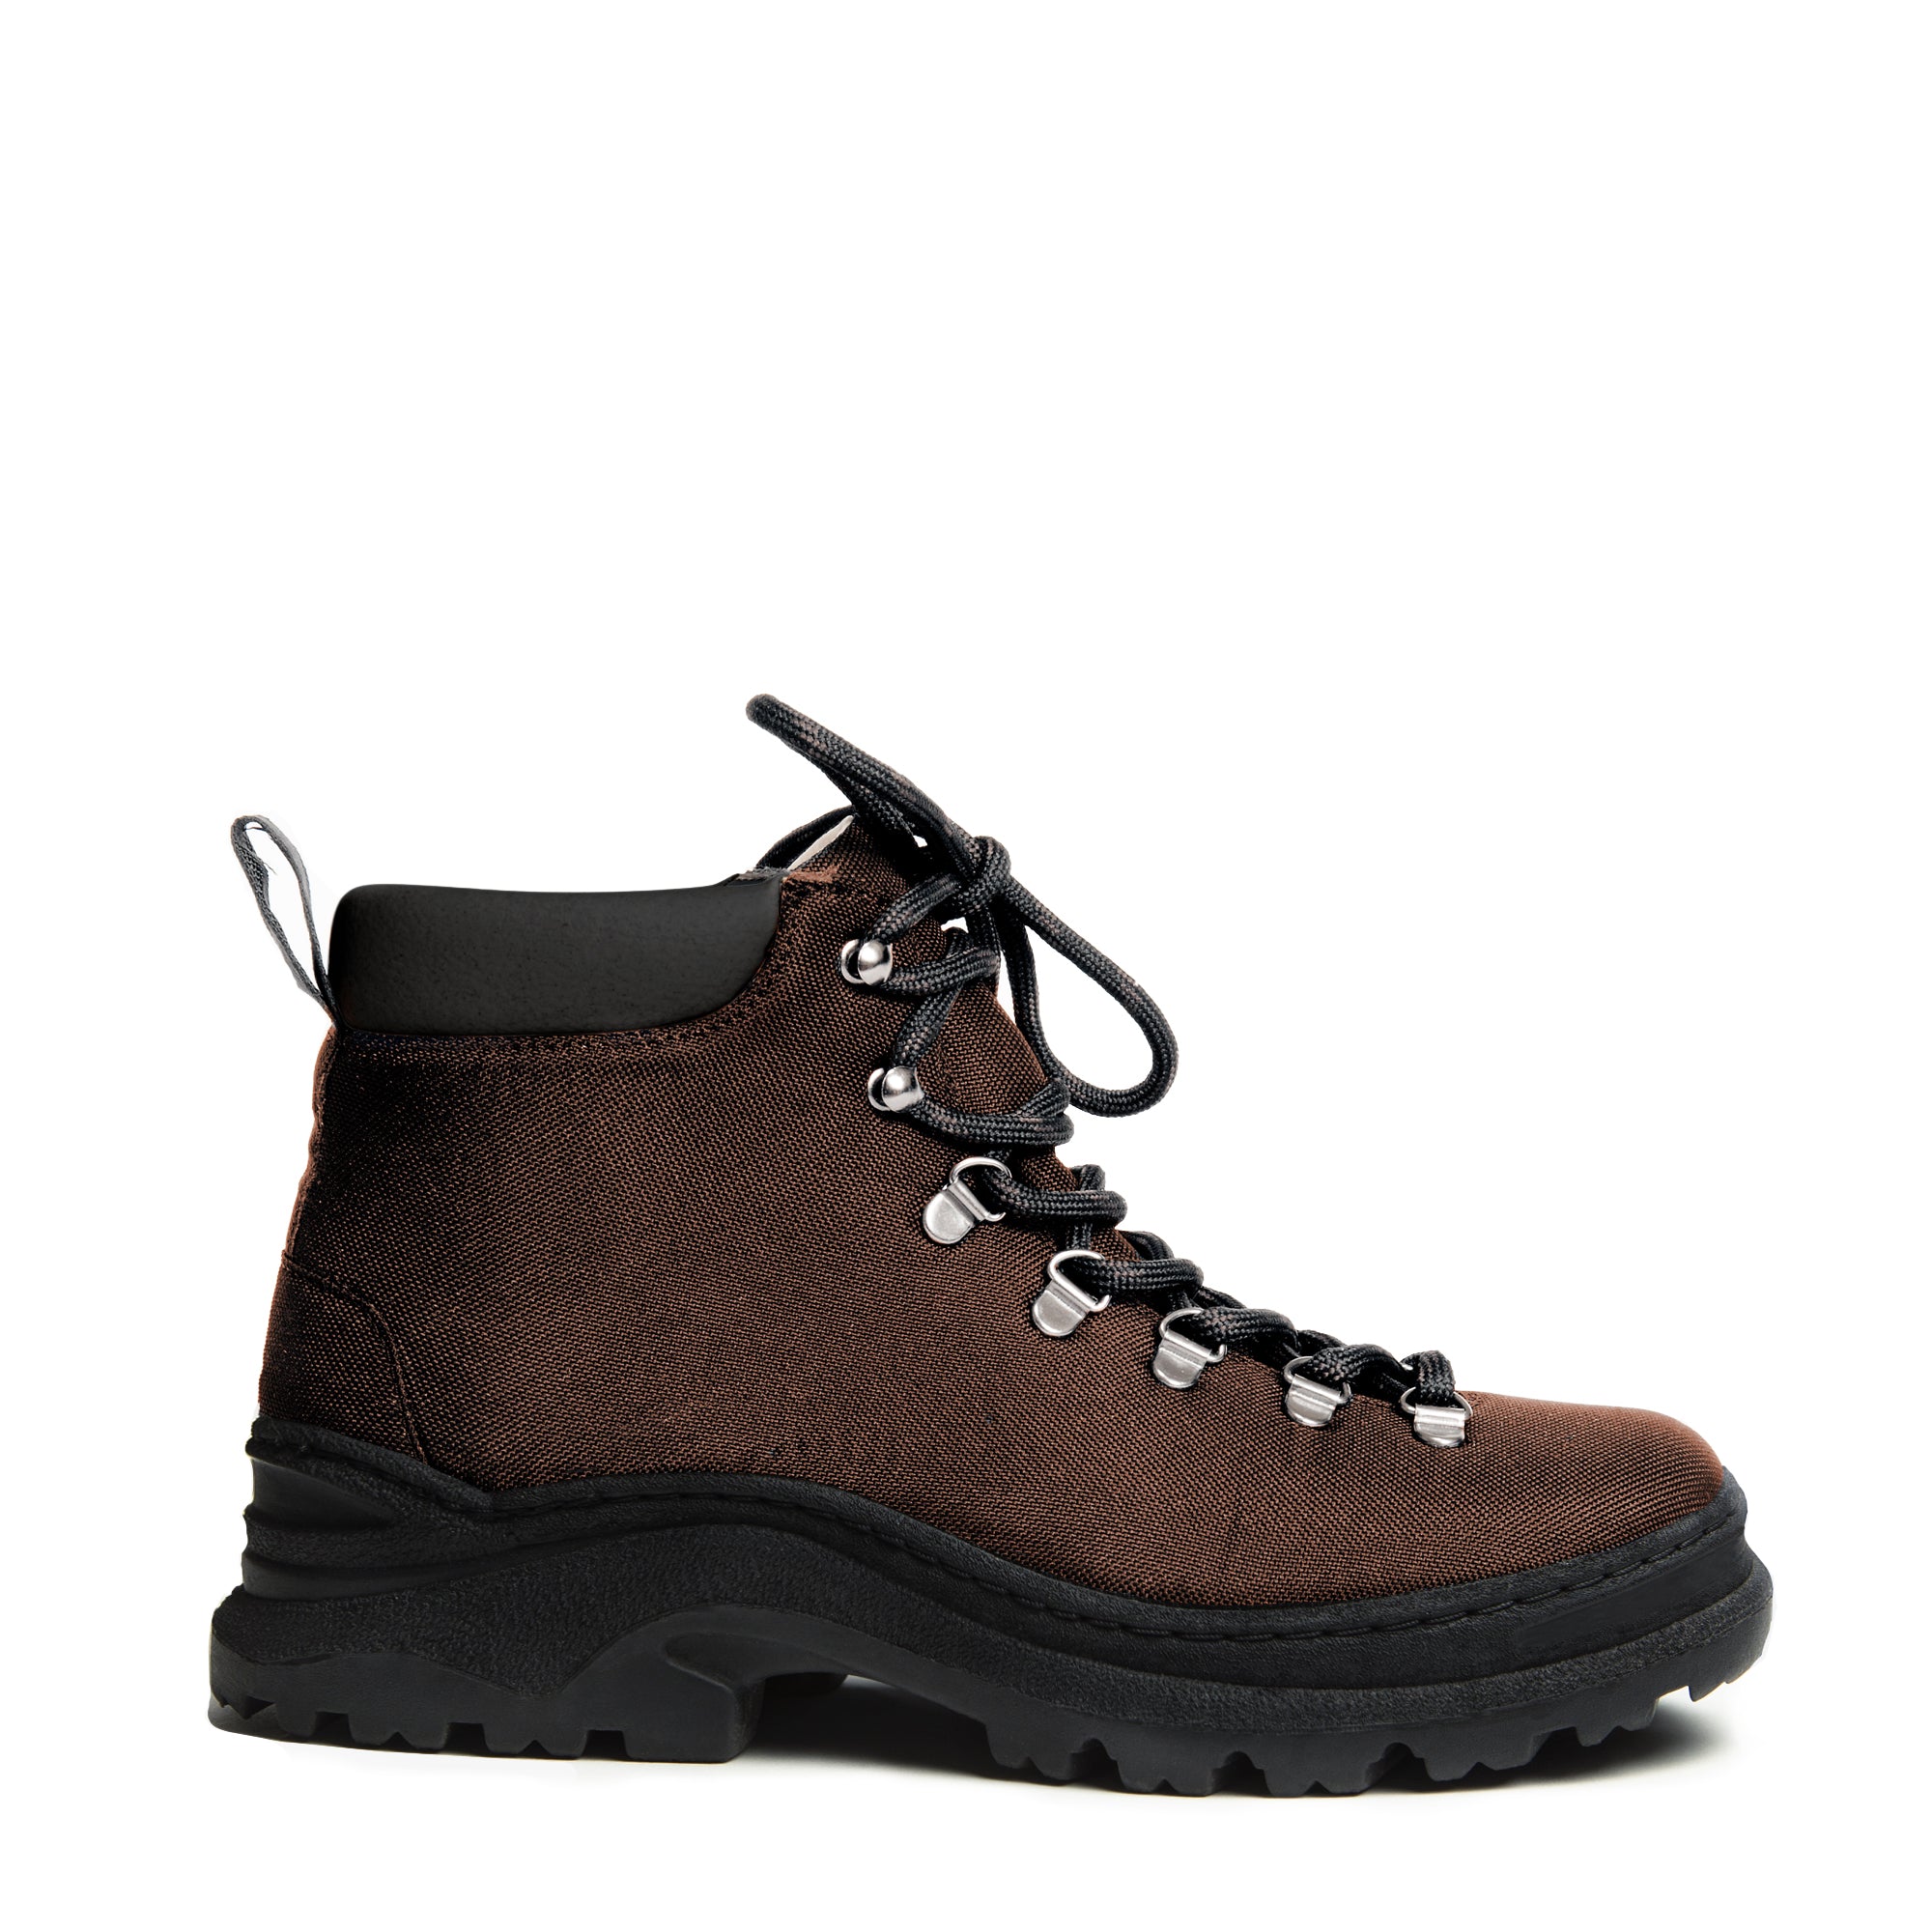 The Weekend Boot Classic Brown - Alice + Whittles